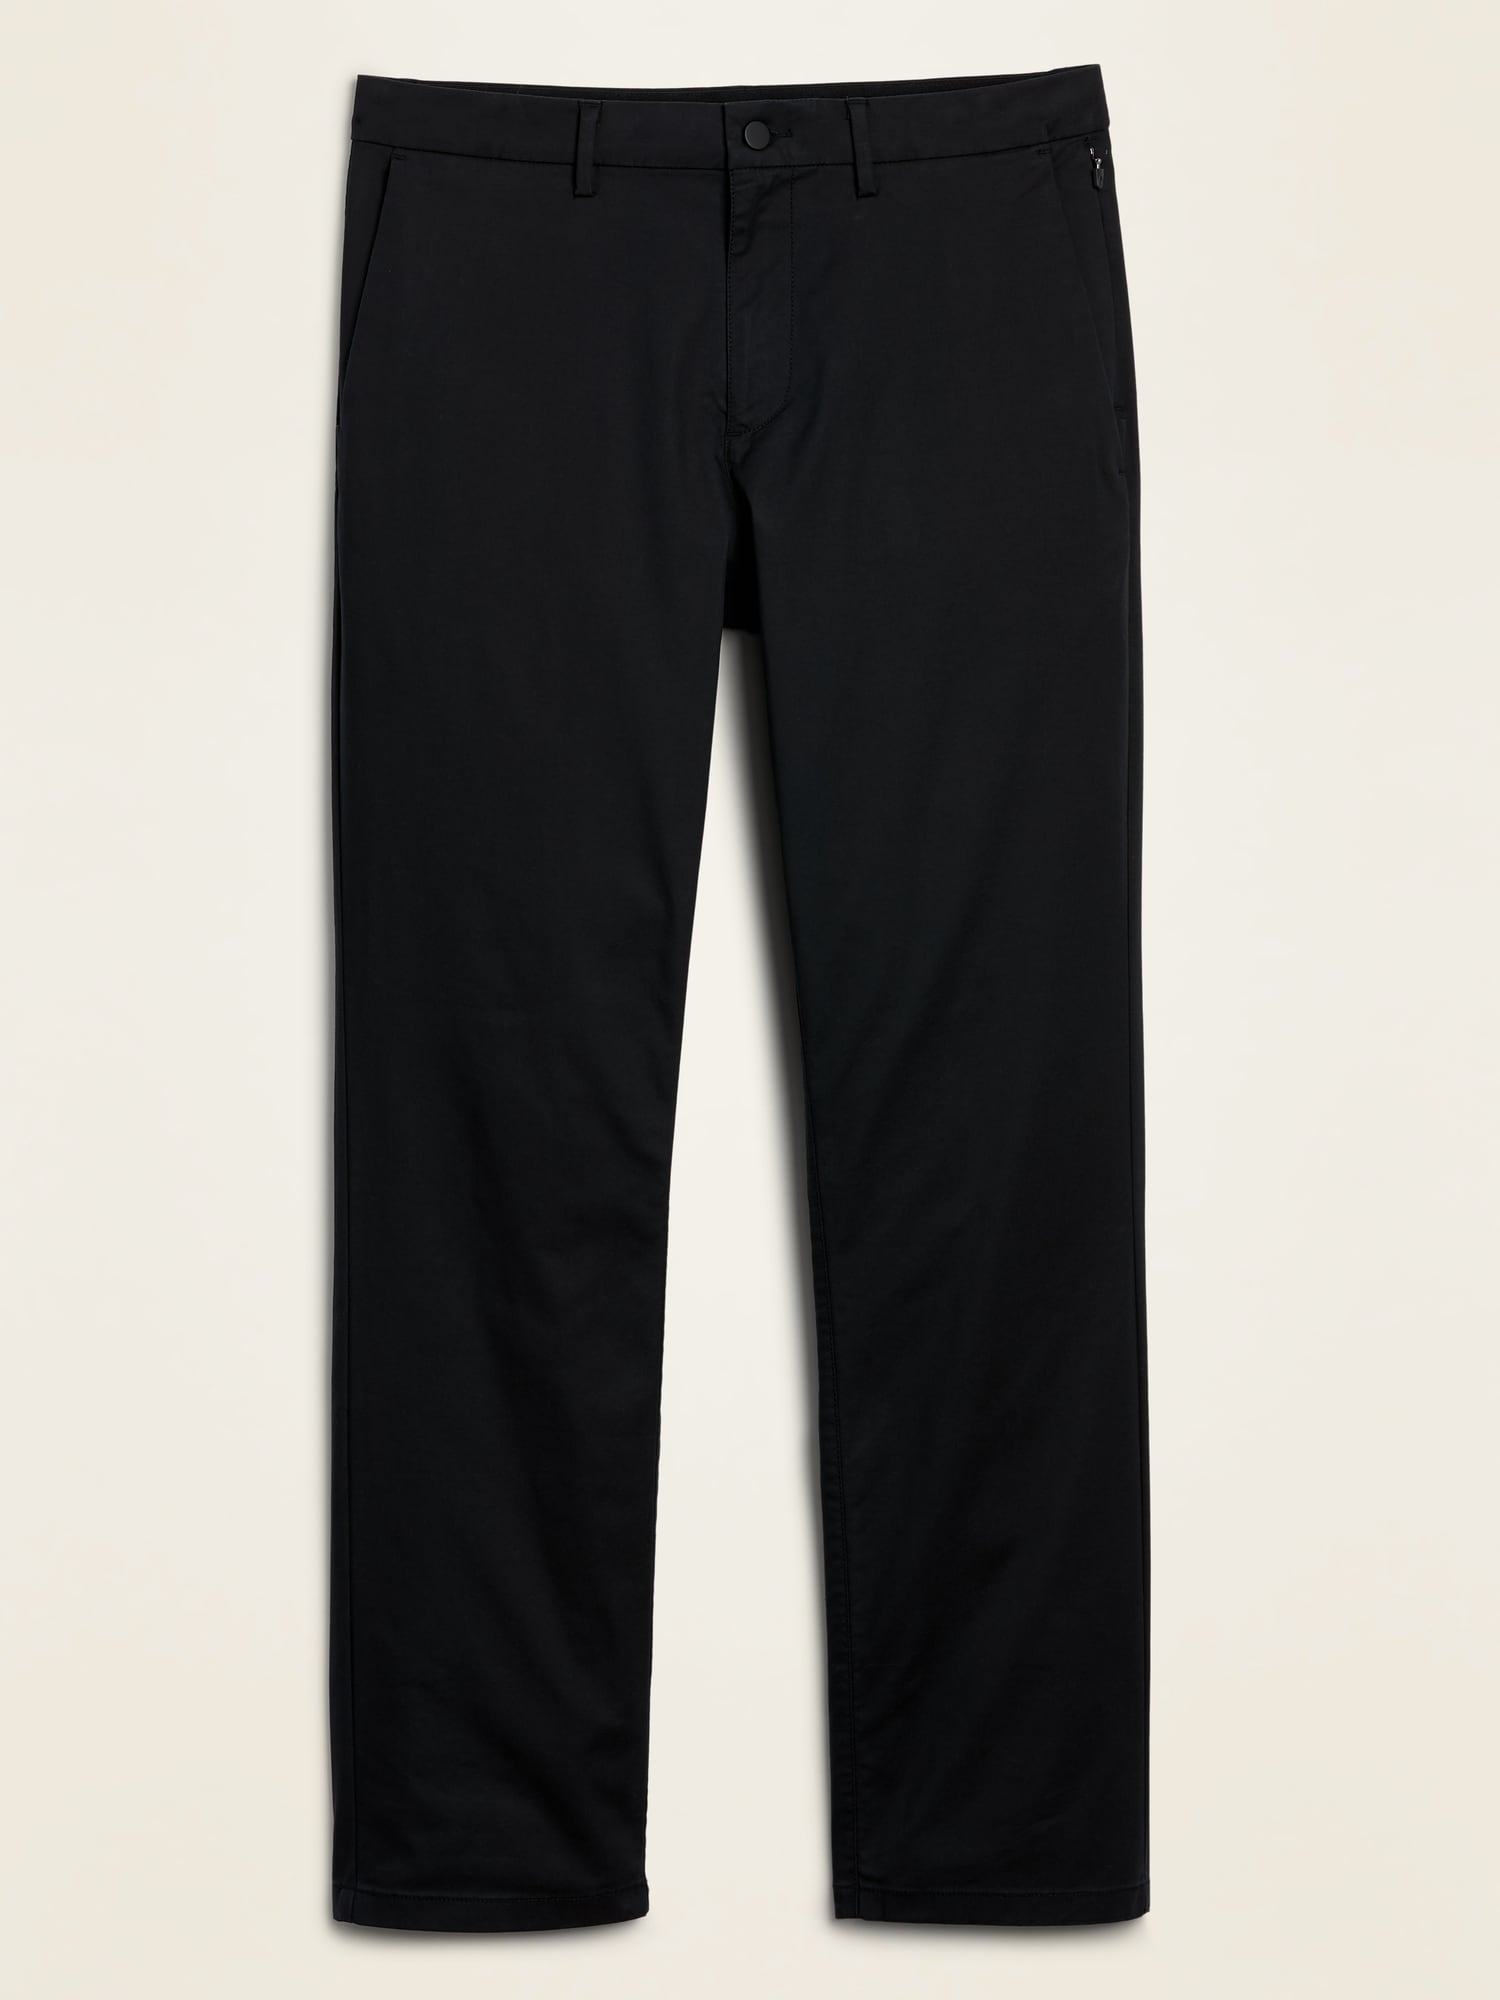 Straight Built-In Flex Ultimate Tech Chino Pants | Old Navy